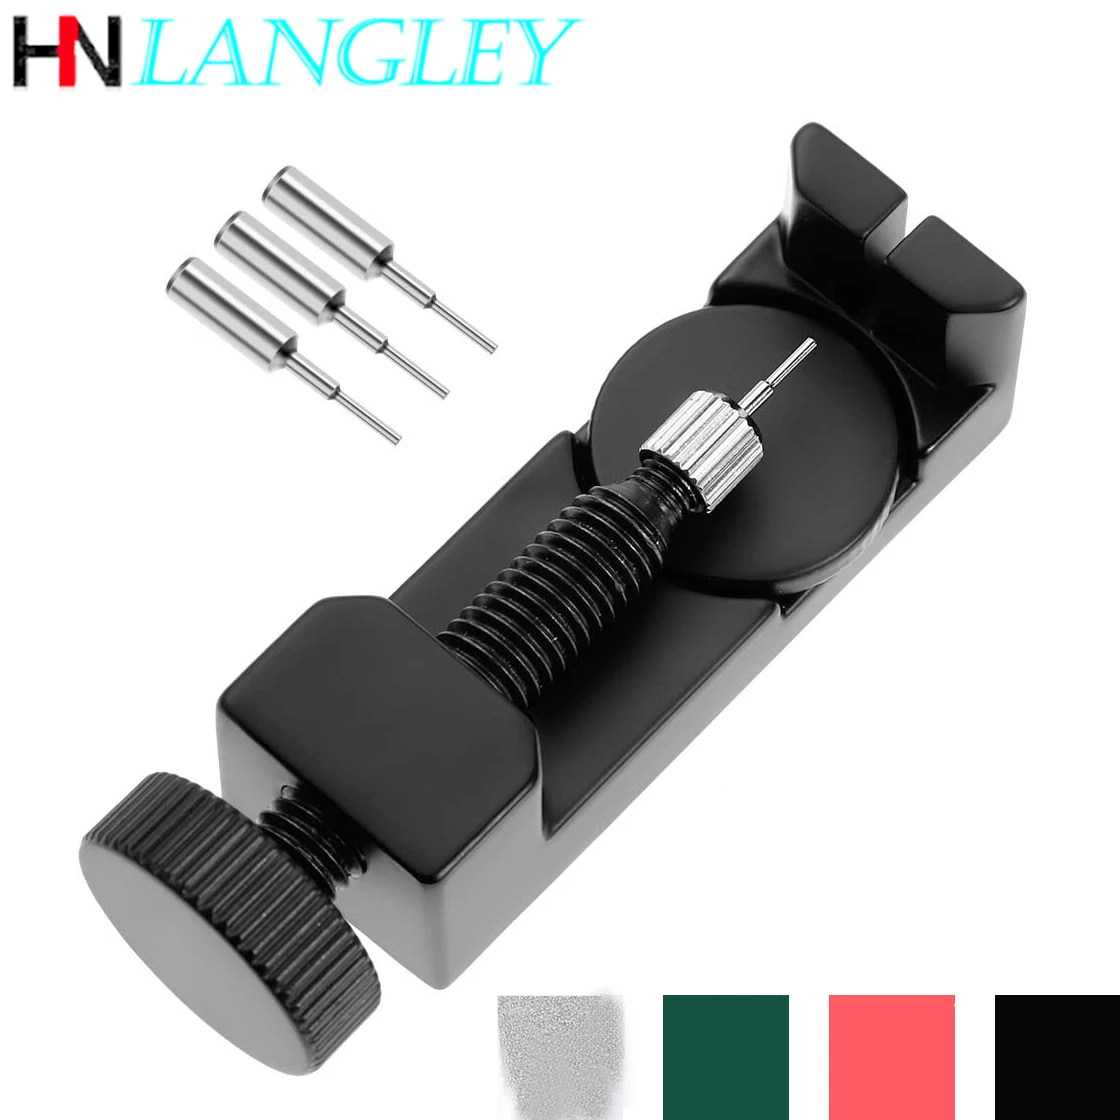 Stainless Steel Watch Band Tool Metal Watch Link Pin Remover Repair Tool Kit for Watchmakers Replacement Remover Watch Sizing